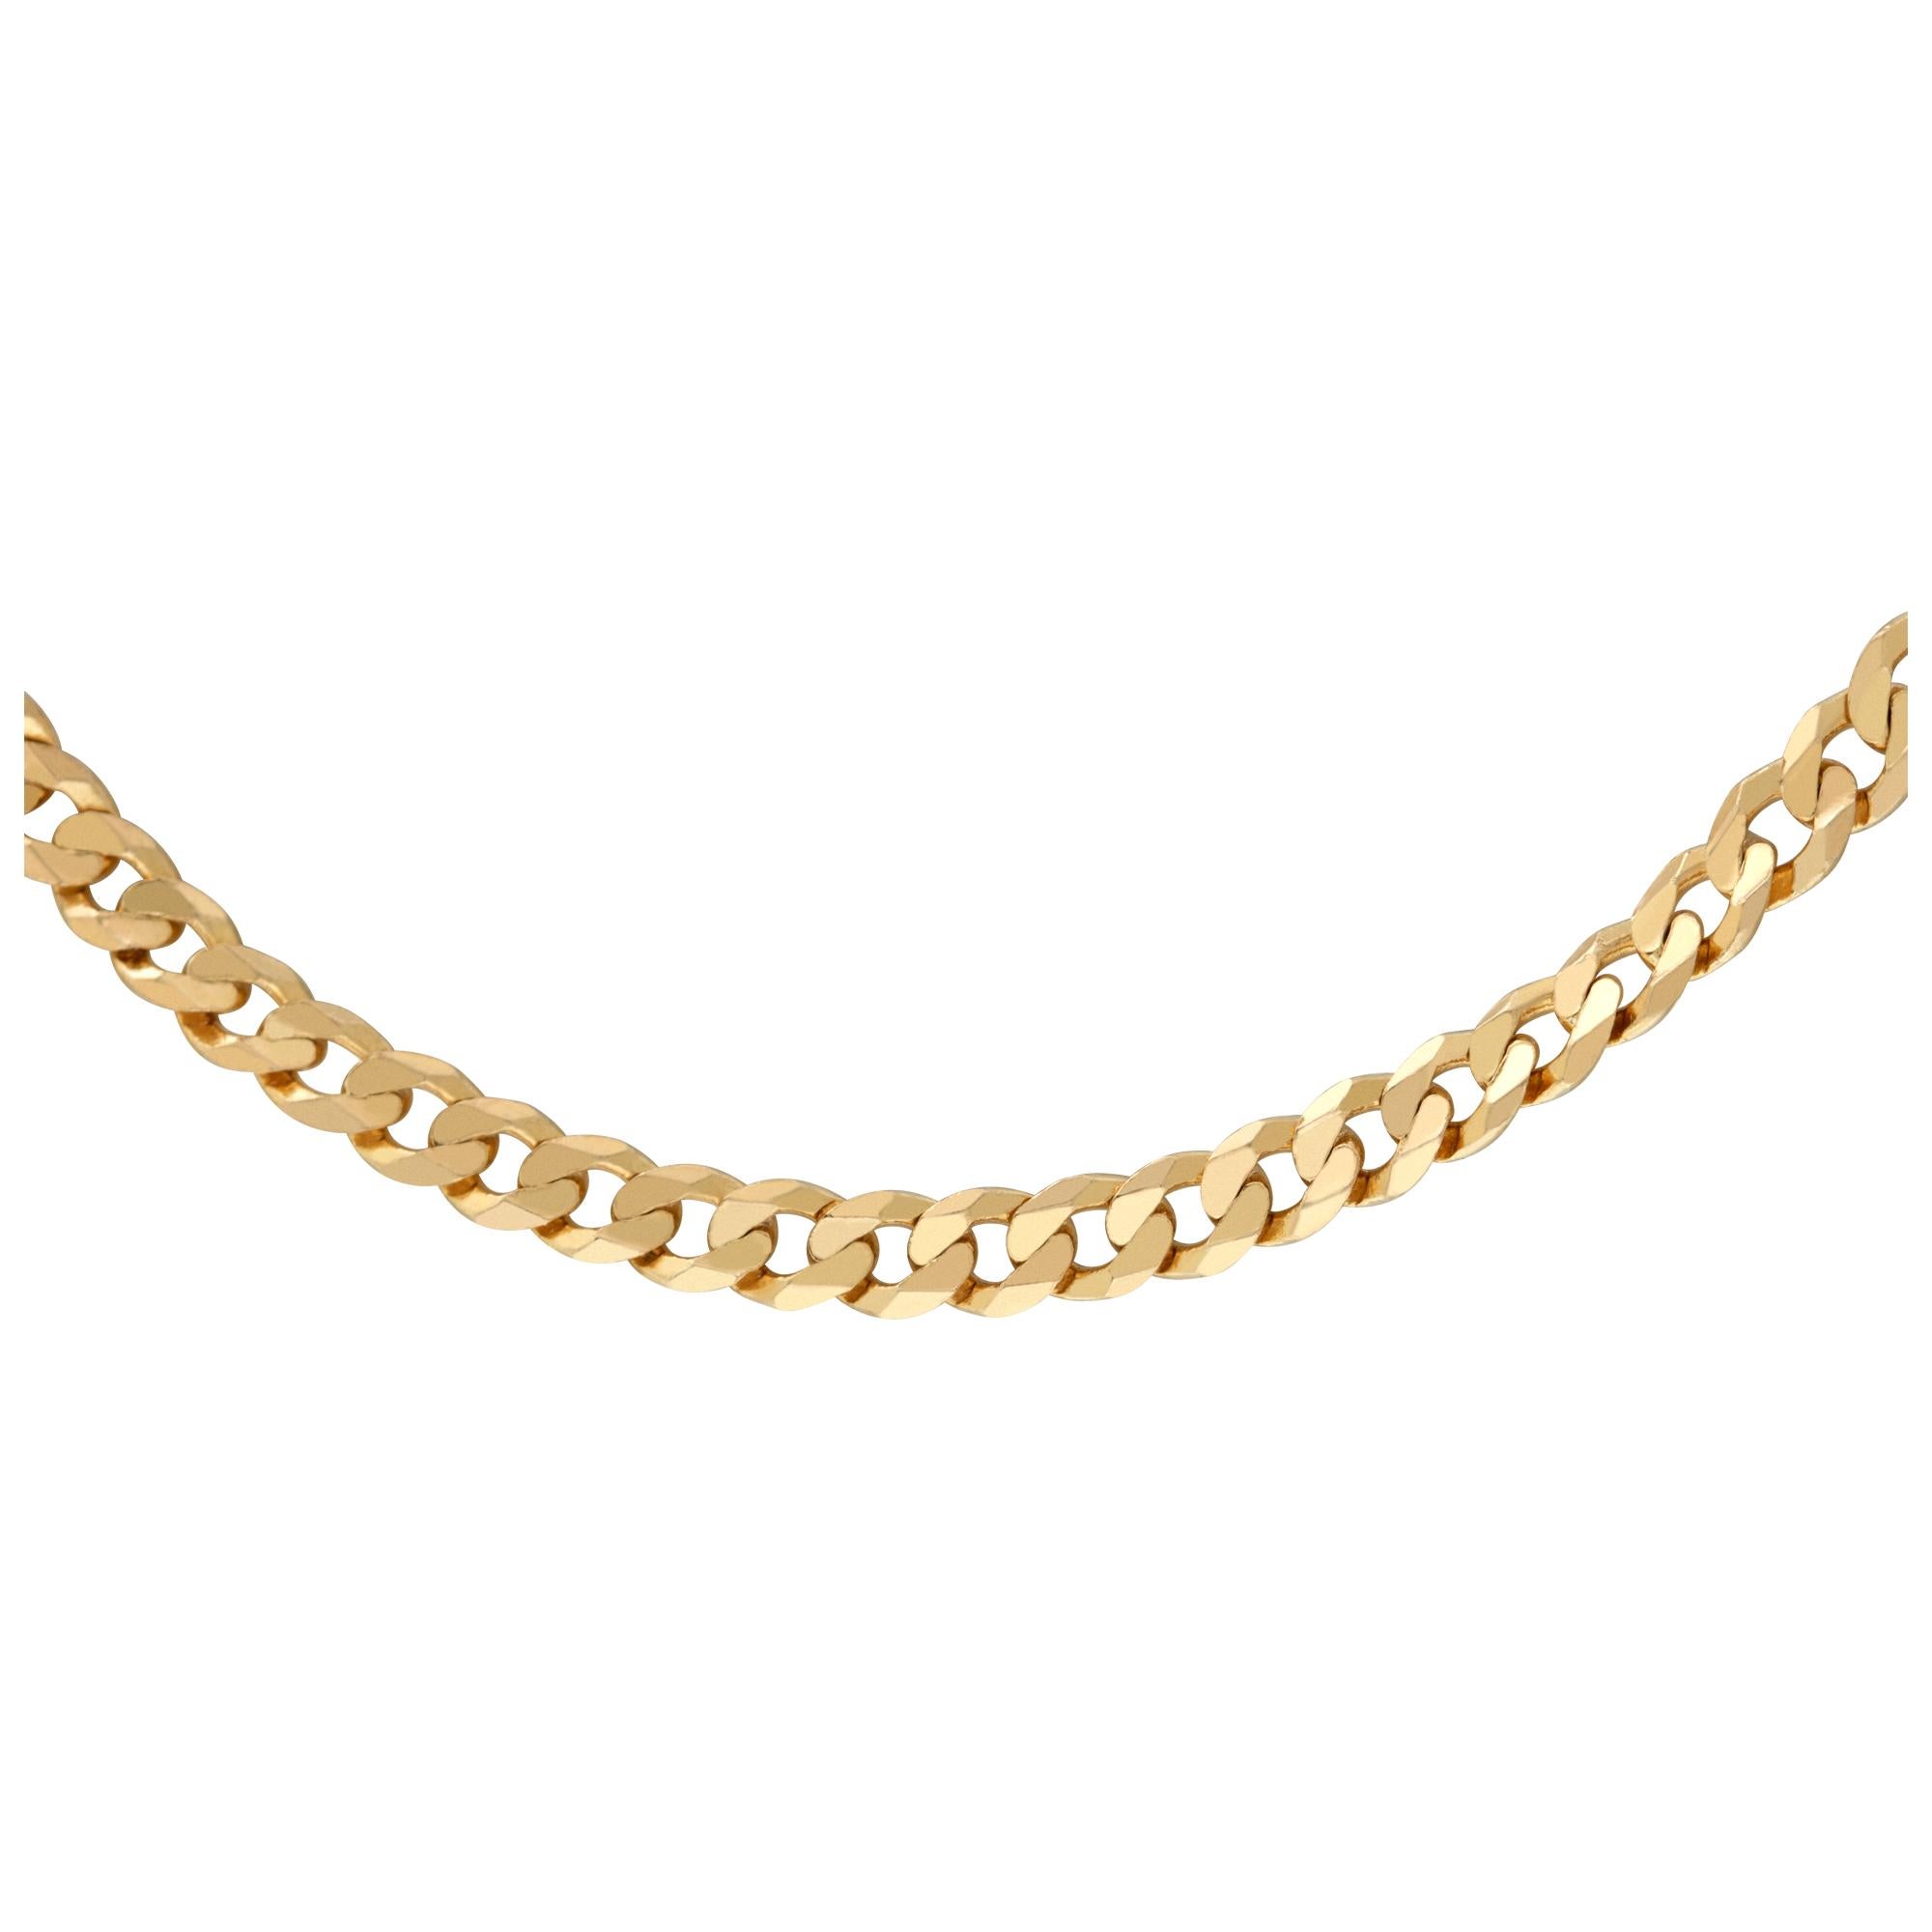 Delicate 14k gold chain. Length 18 inches.Width 3.5mm.
